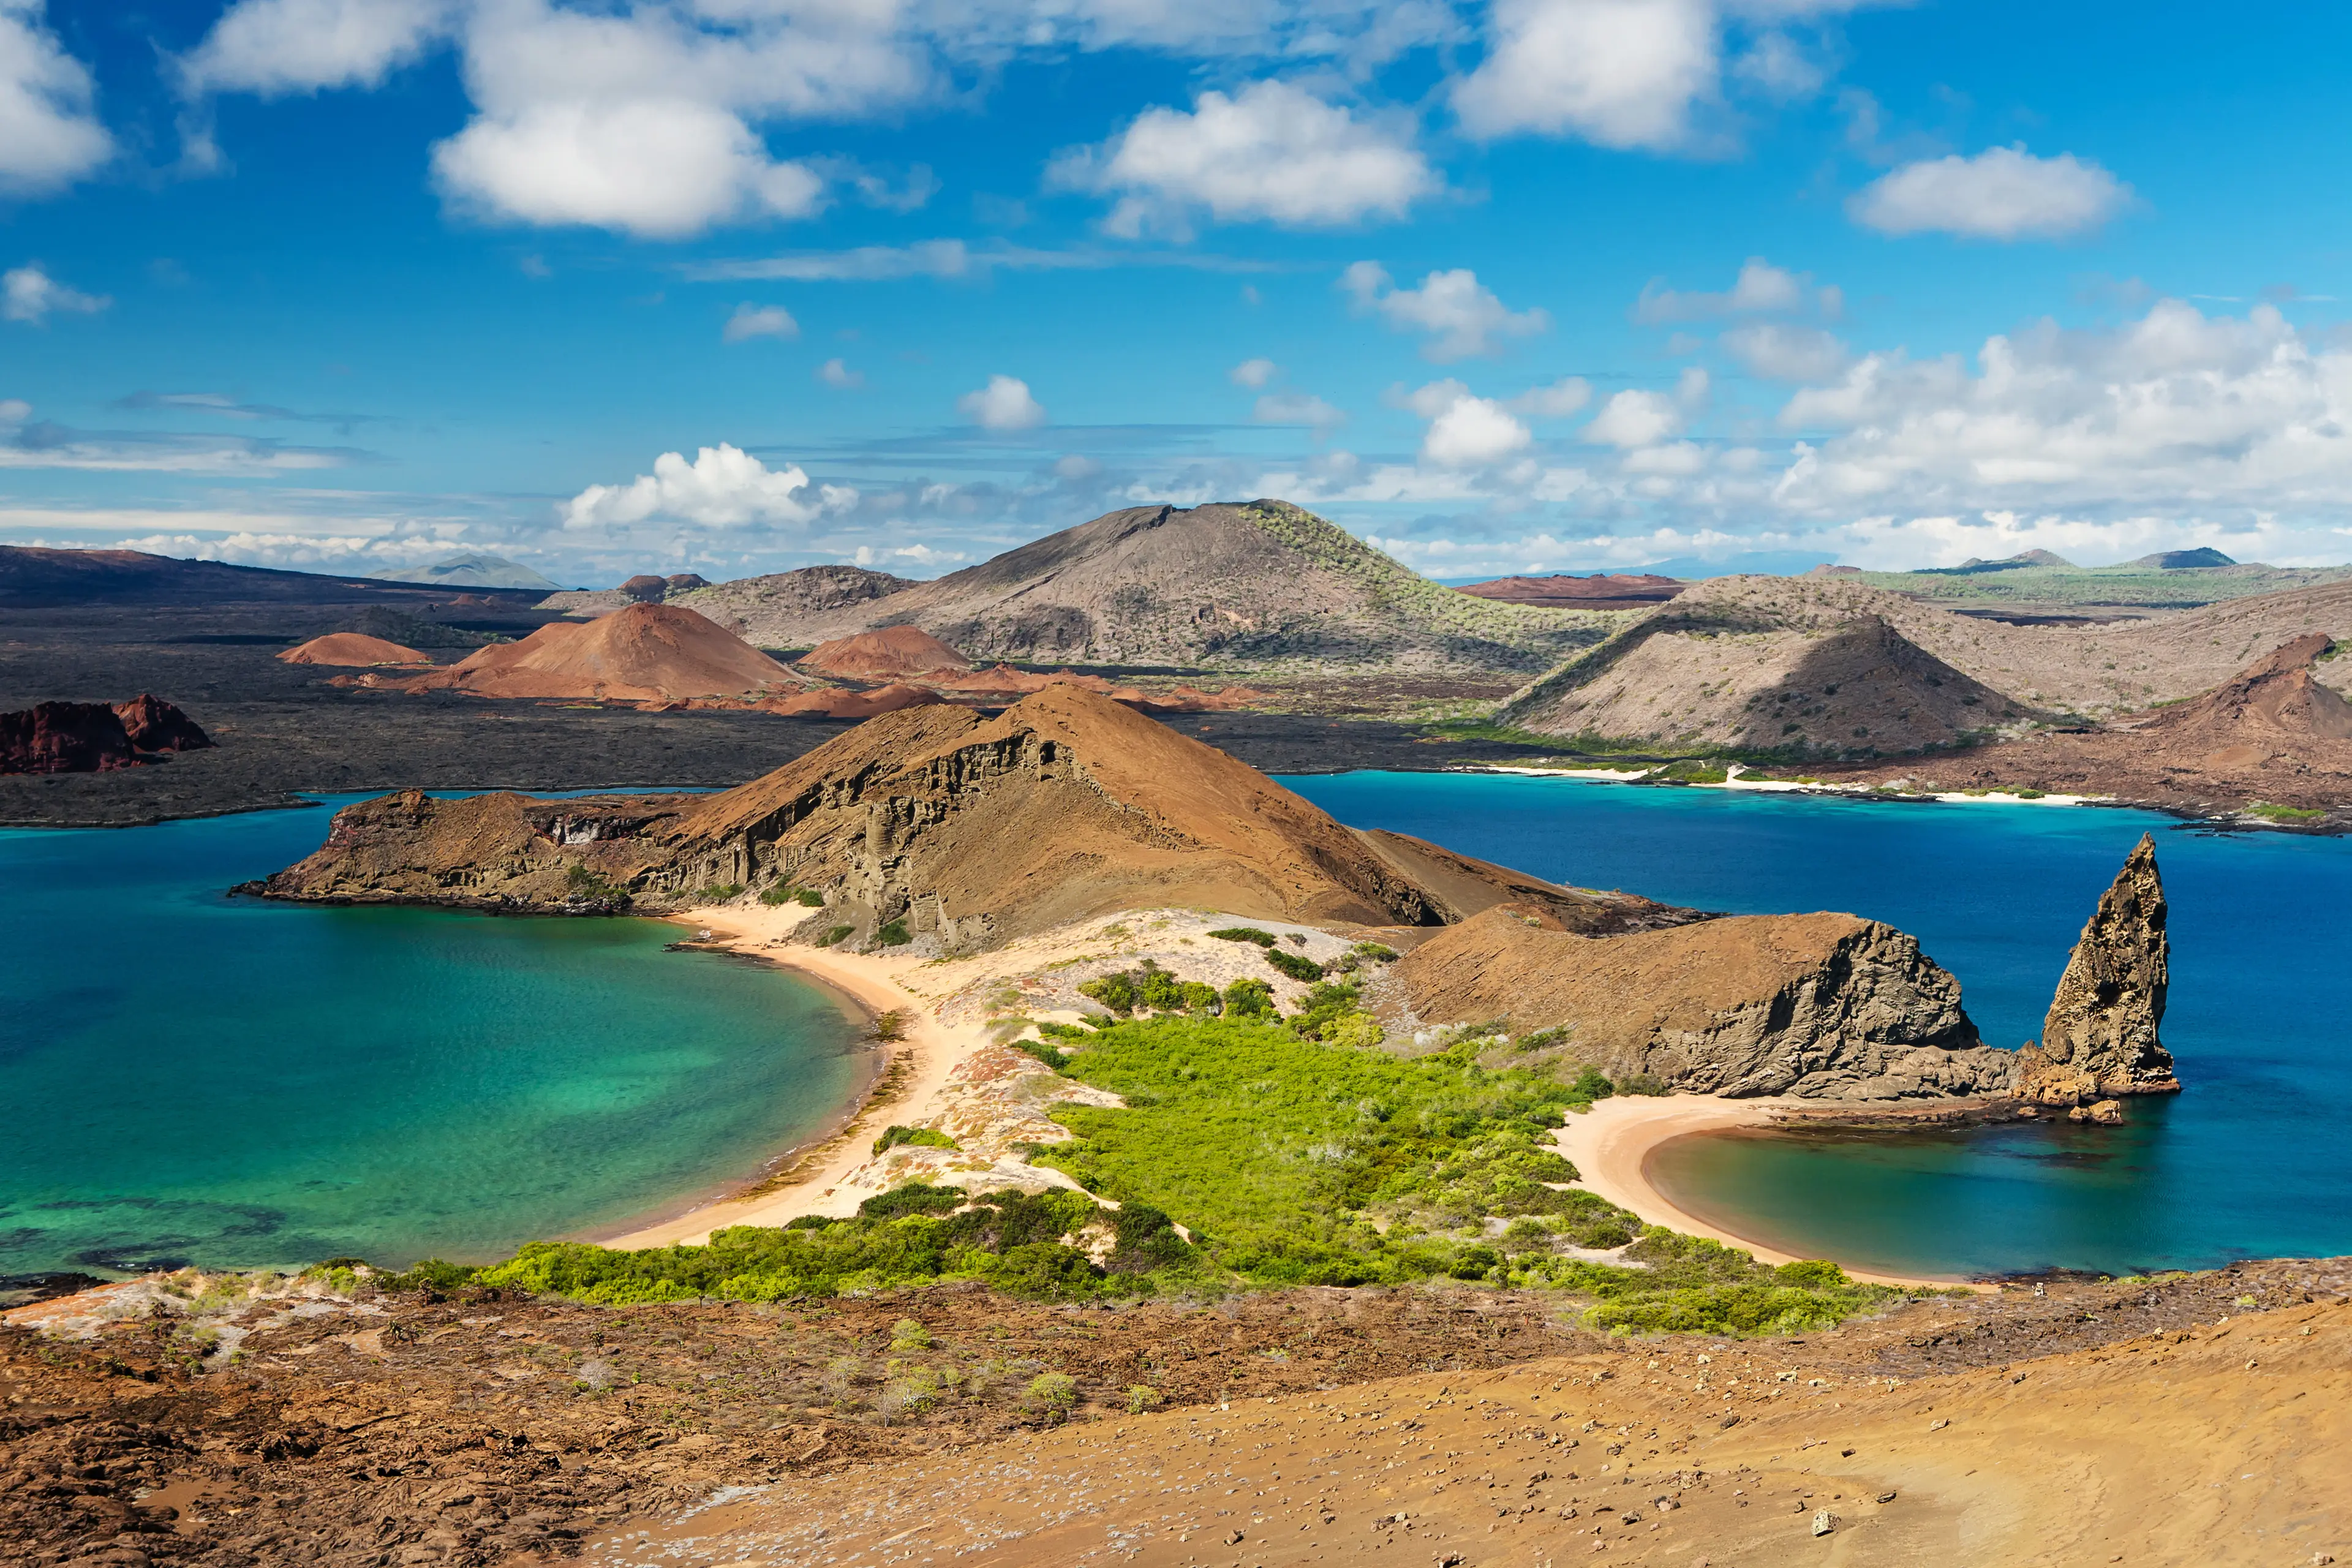 2-Day Local Adventure and Sightseeing Itinerary in Galapagos